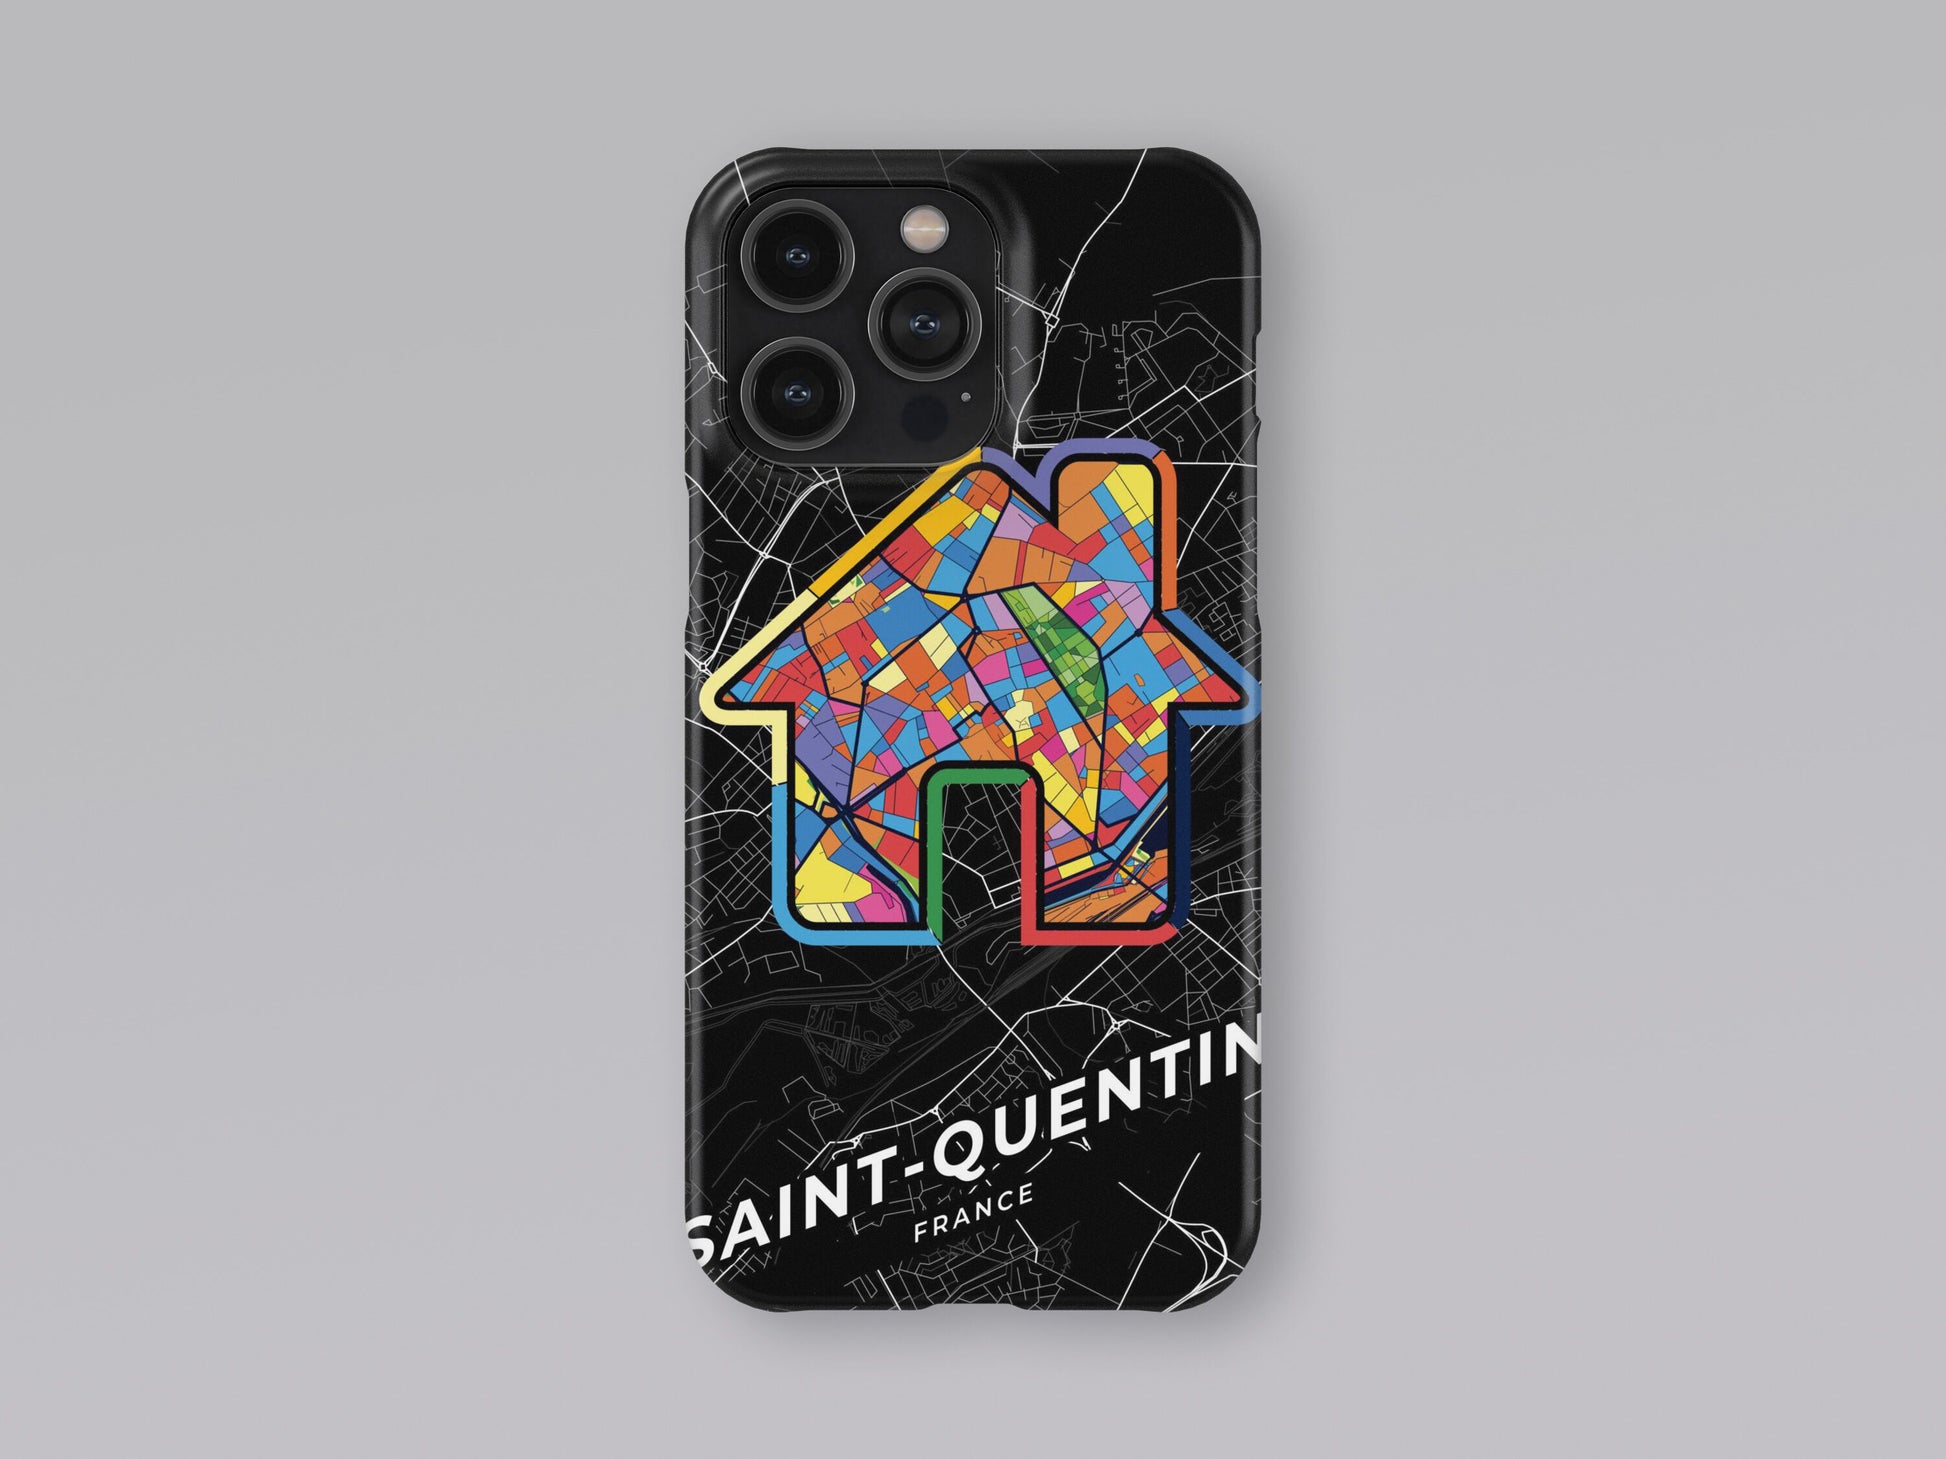 Saint-Quentin France slim phone case with colorful icon. Birthday, wedding or housewarming gift. Couple match cases. 3